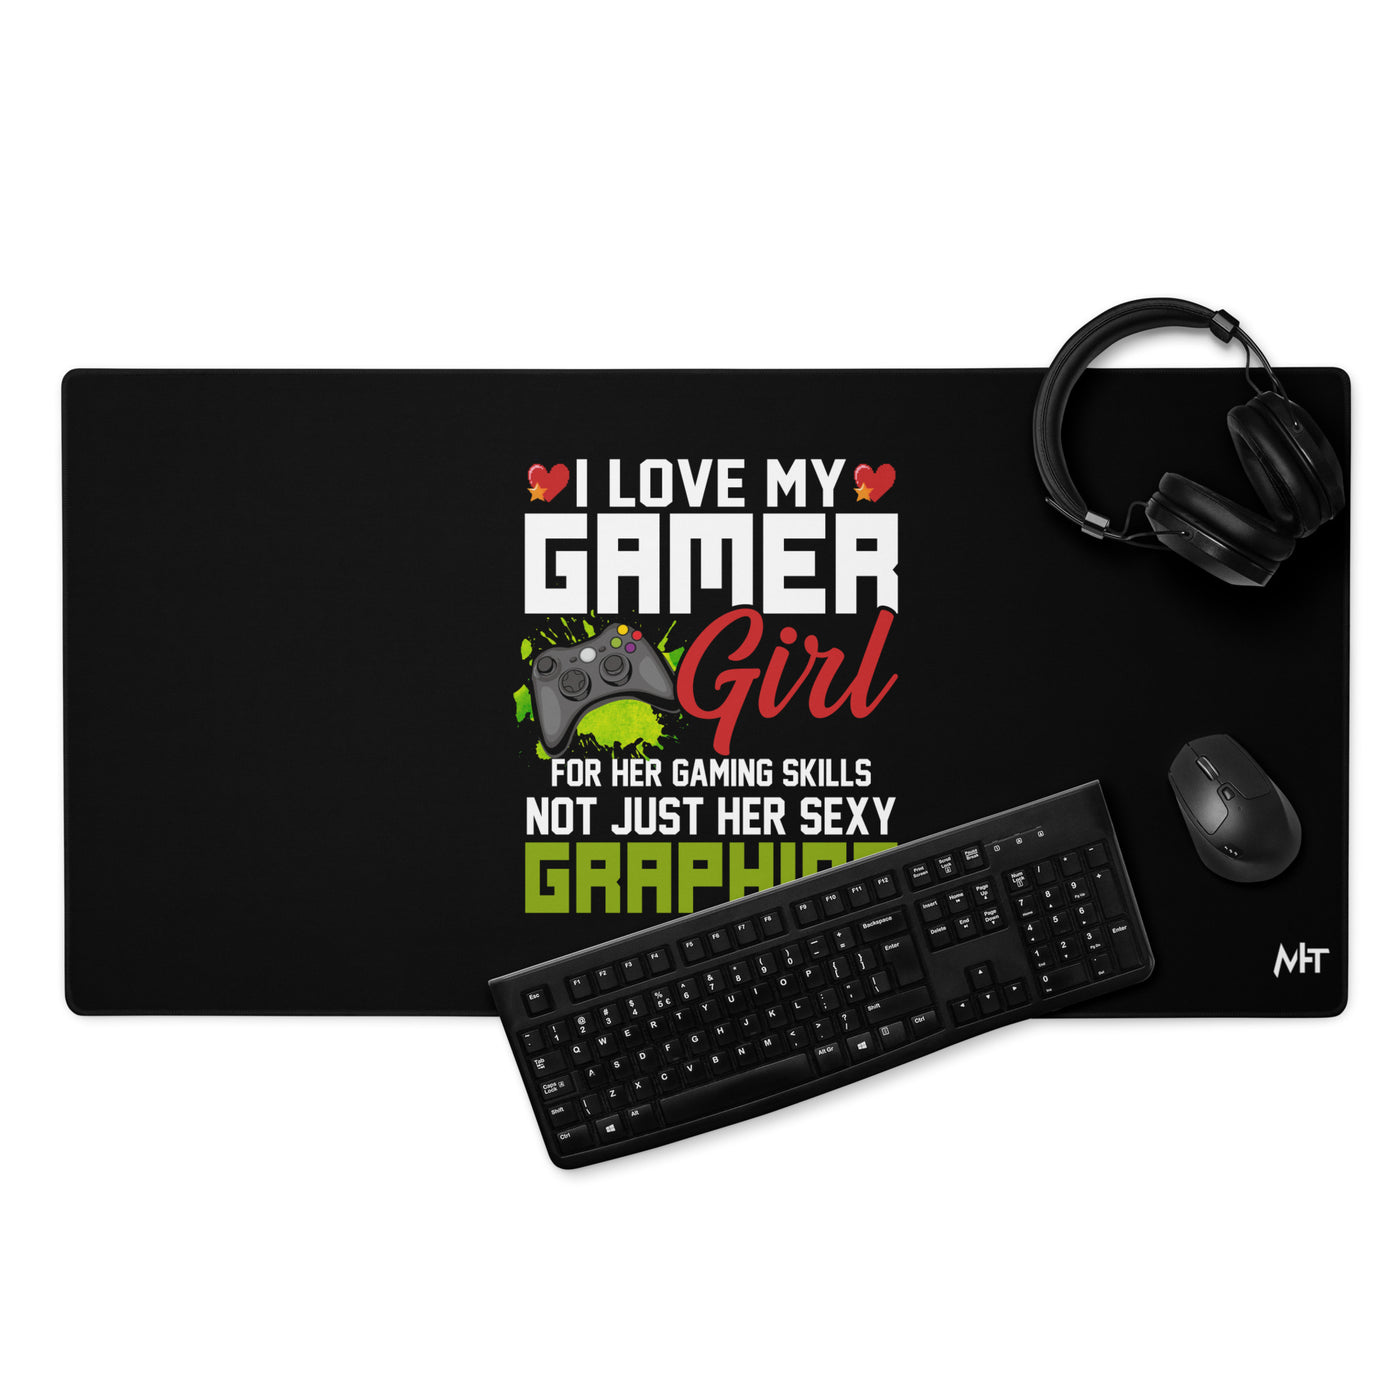 I Love my Gamer Girl for her gaming skills - Gaming mouse pad